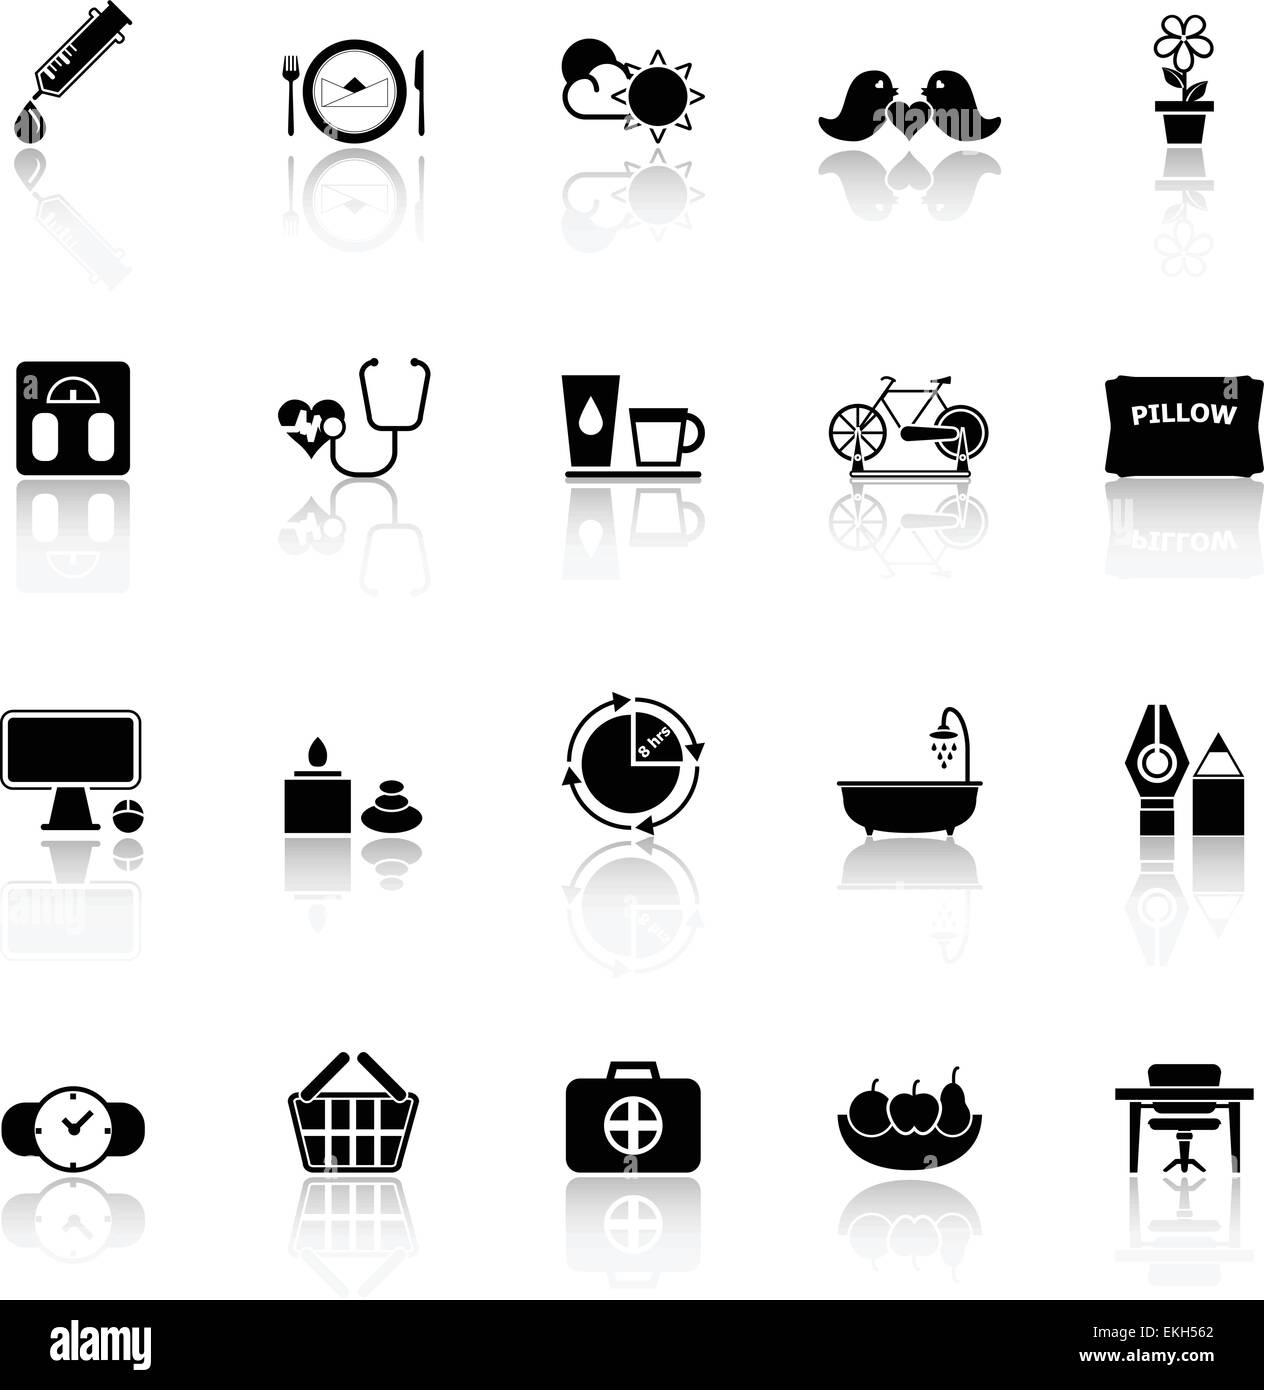 Health behavior icons with reflect on white background, stock vector Stock Vector